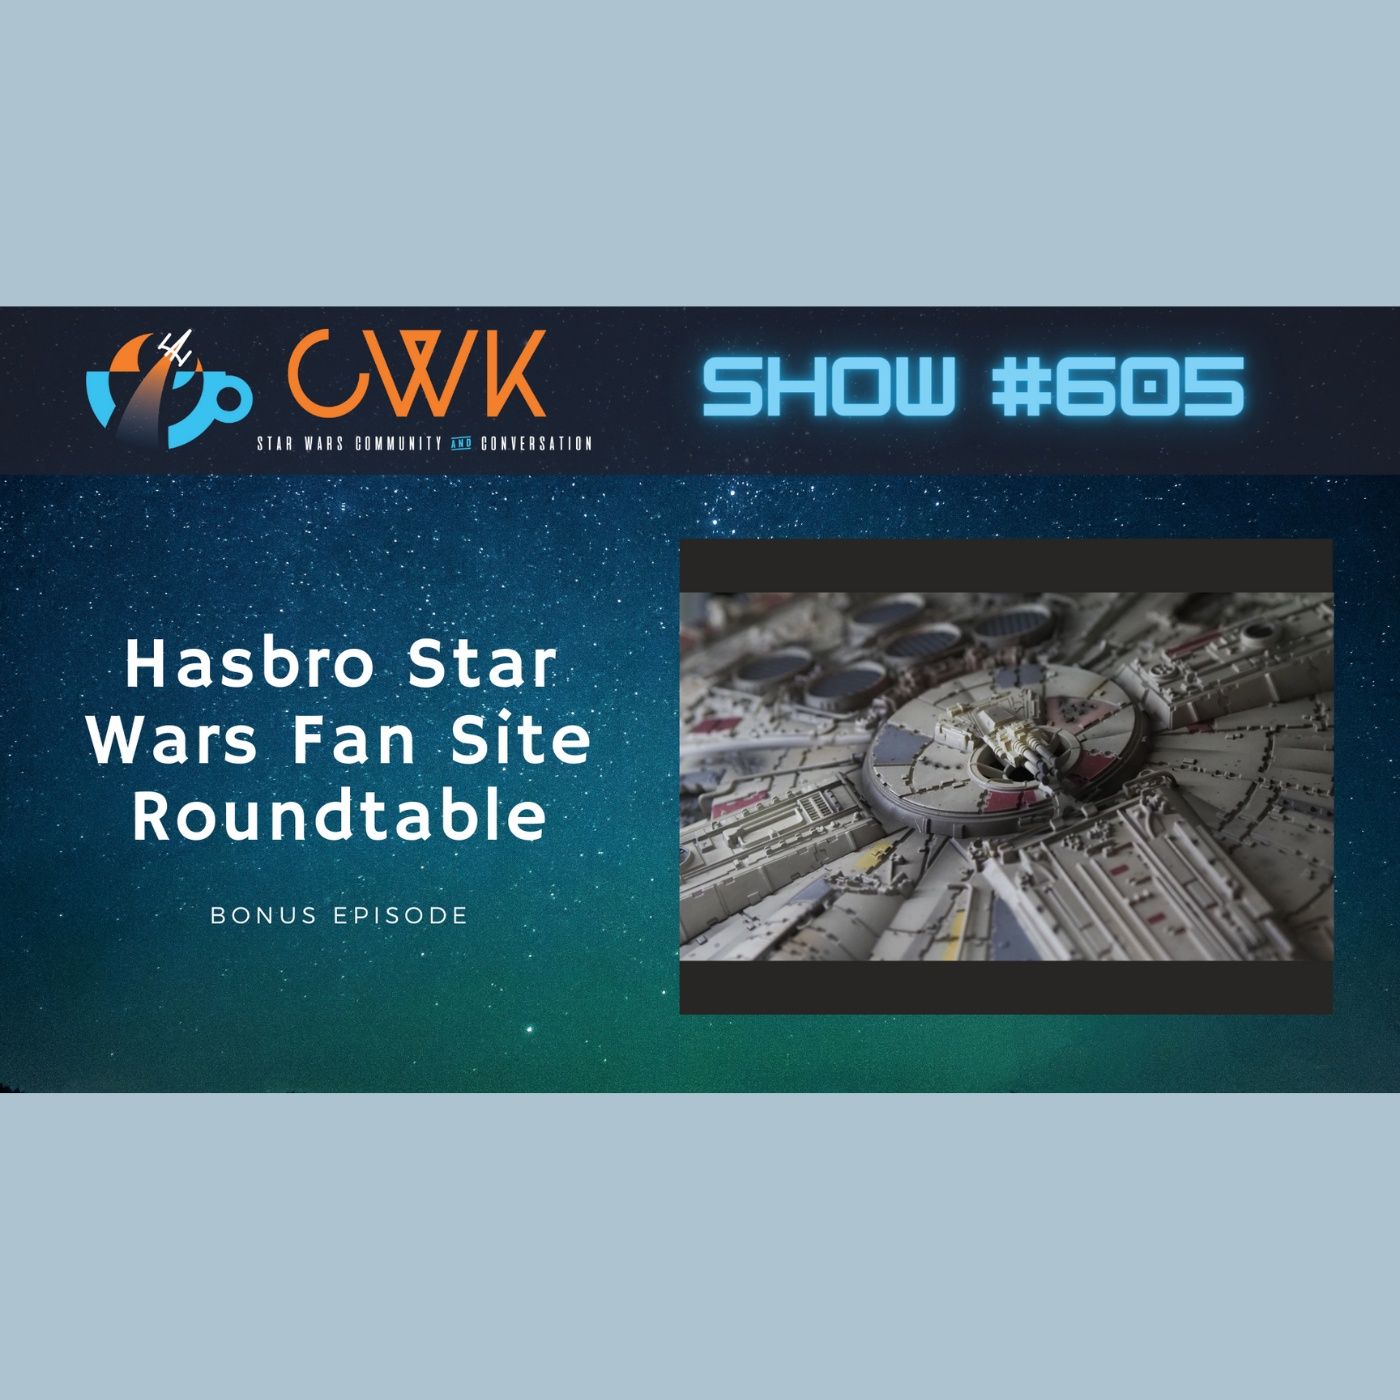 CWK Show #605: Hasbro Star Wars Fan Site Round Table